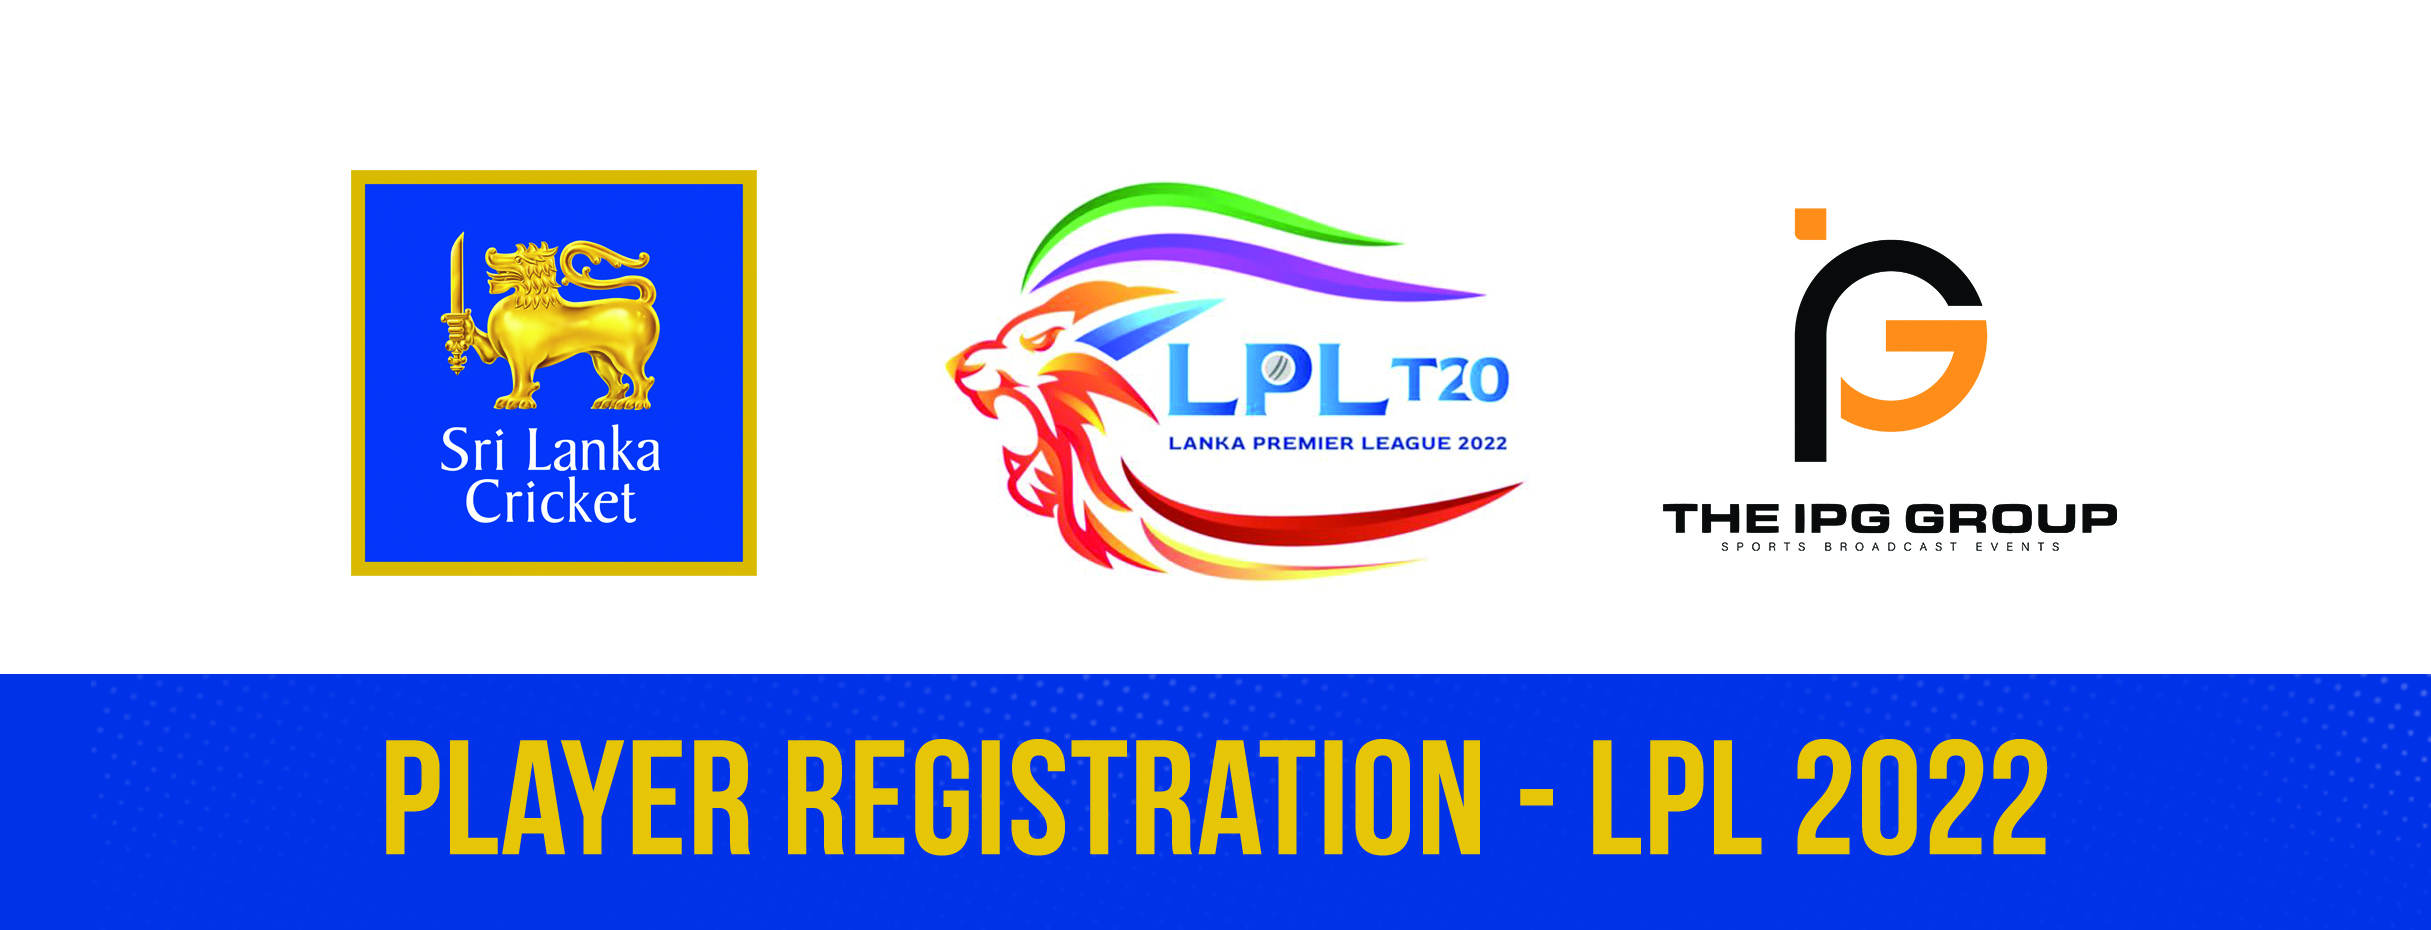 Overseas Player Registration for the 3rd Edition of LPL starting from 14th June